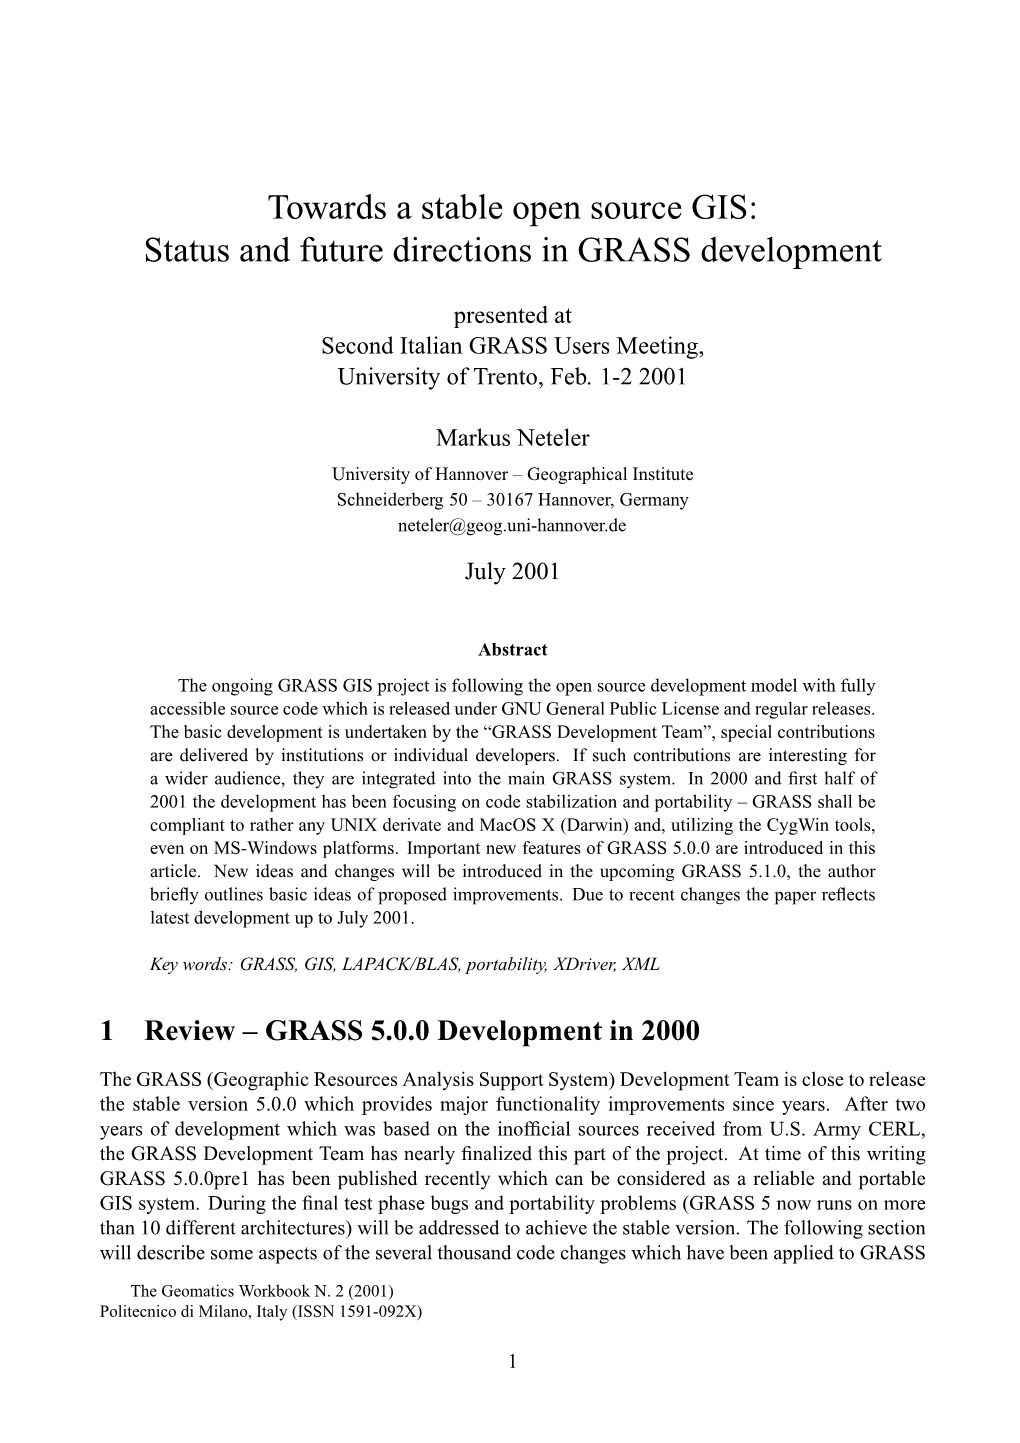 Towards a Stable Open Source GIS: Status and Future Directions in GRASS Development